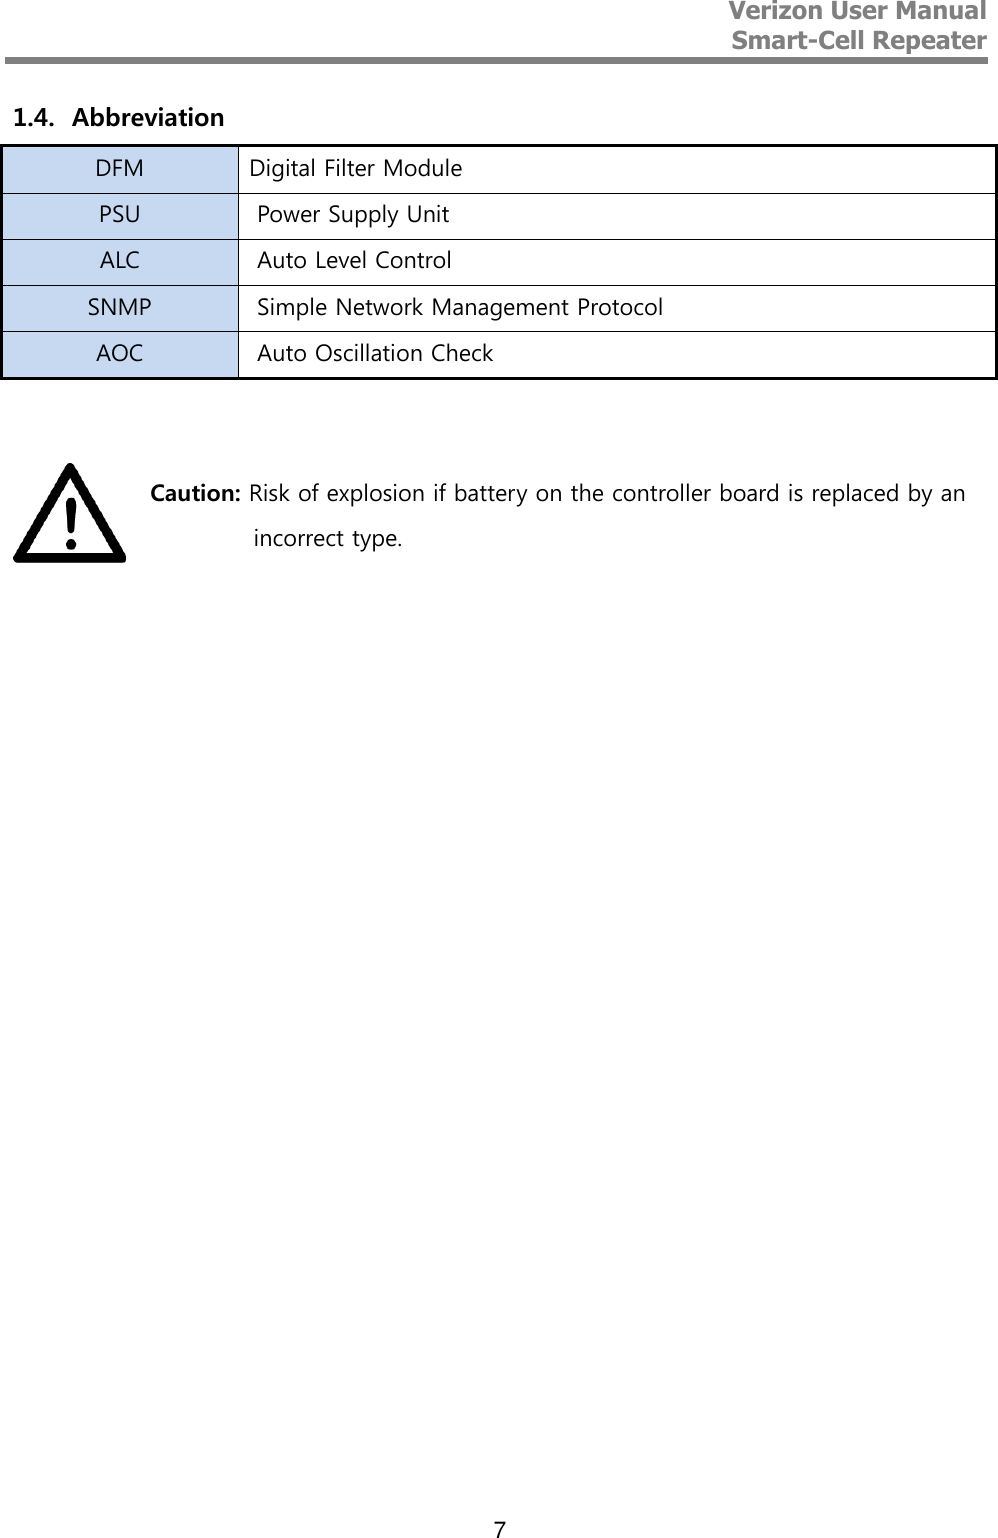 Verizon User Manual  Smart-Cell Repeater   7 1.4. Abbreviation  DFM Digital Filter Module PSU  Power Supply Unit ALC  Auto Level Control SNMP  Simple Network Management Protocol AOC  Auto Oscillation Check     Caution: Risk of explosion if battery on the controller board is replaced by an  incorrect type.                               